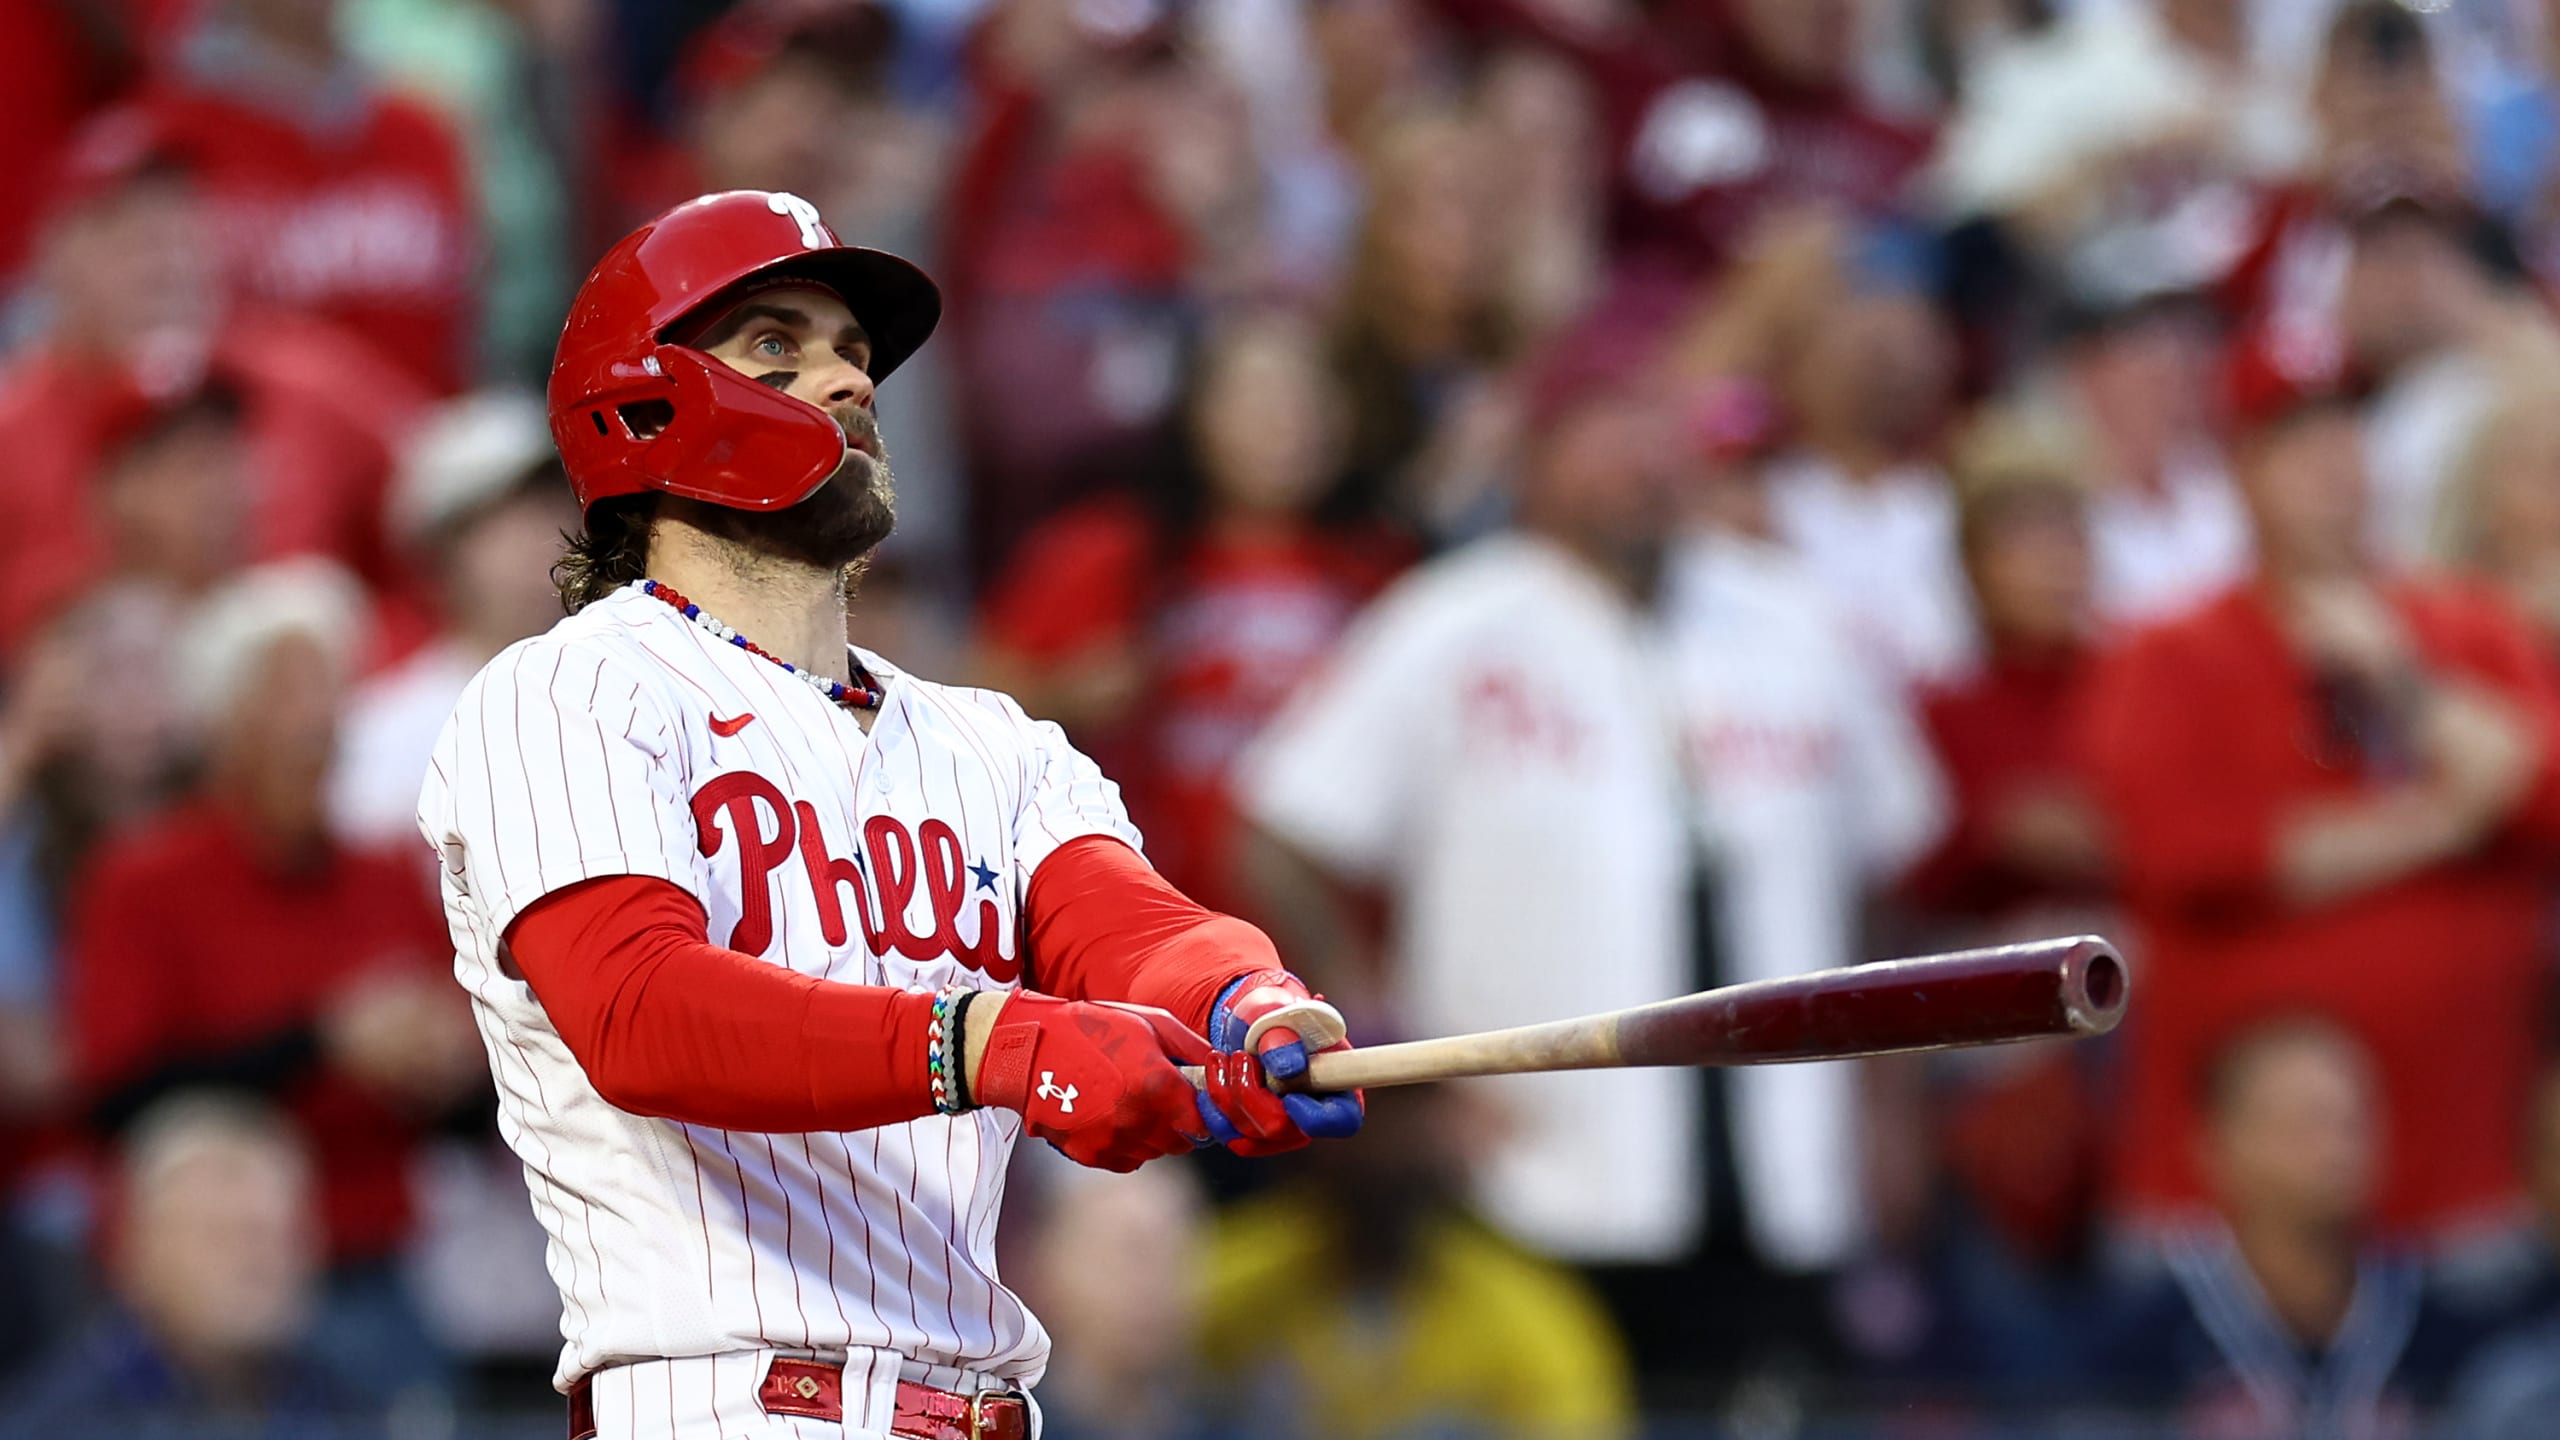 NLCS: Bryce Harper Is Building His Legacy With Phillies - The New